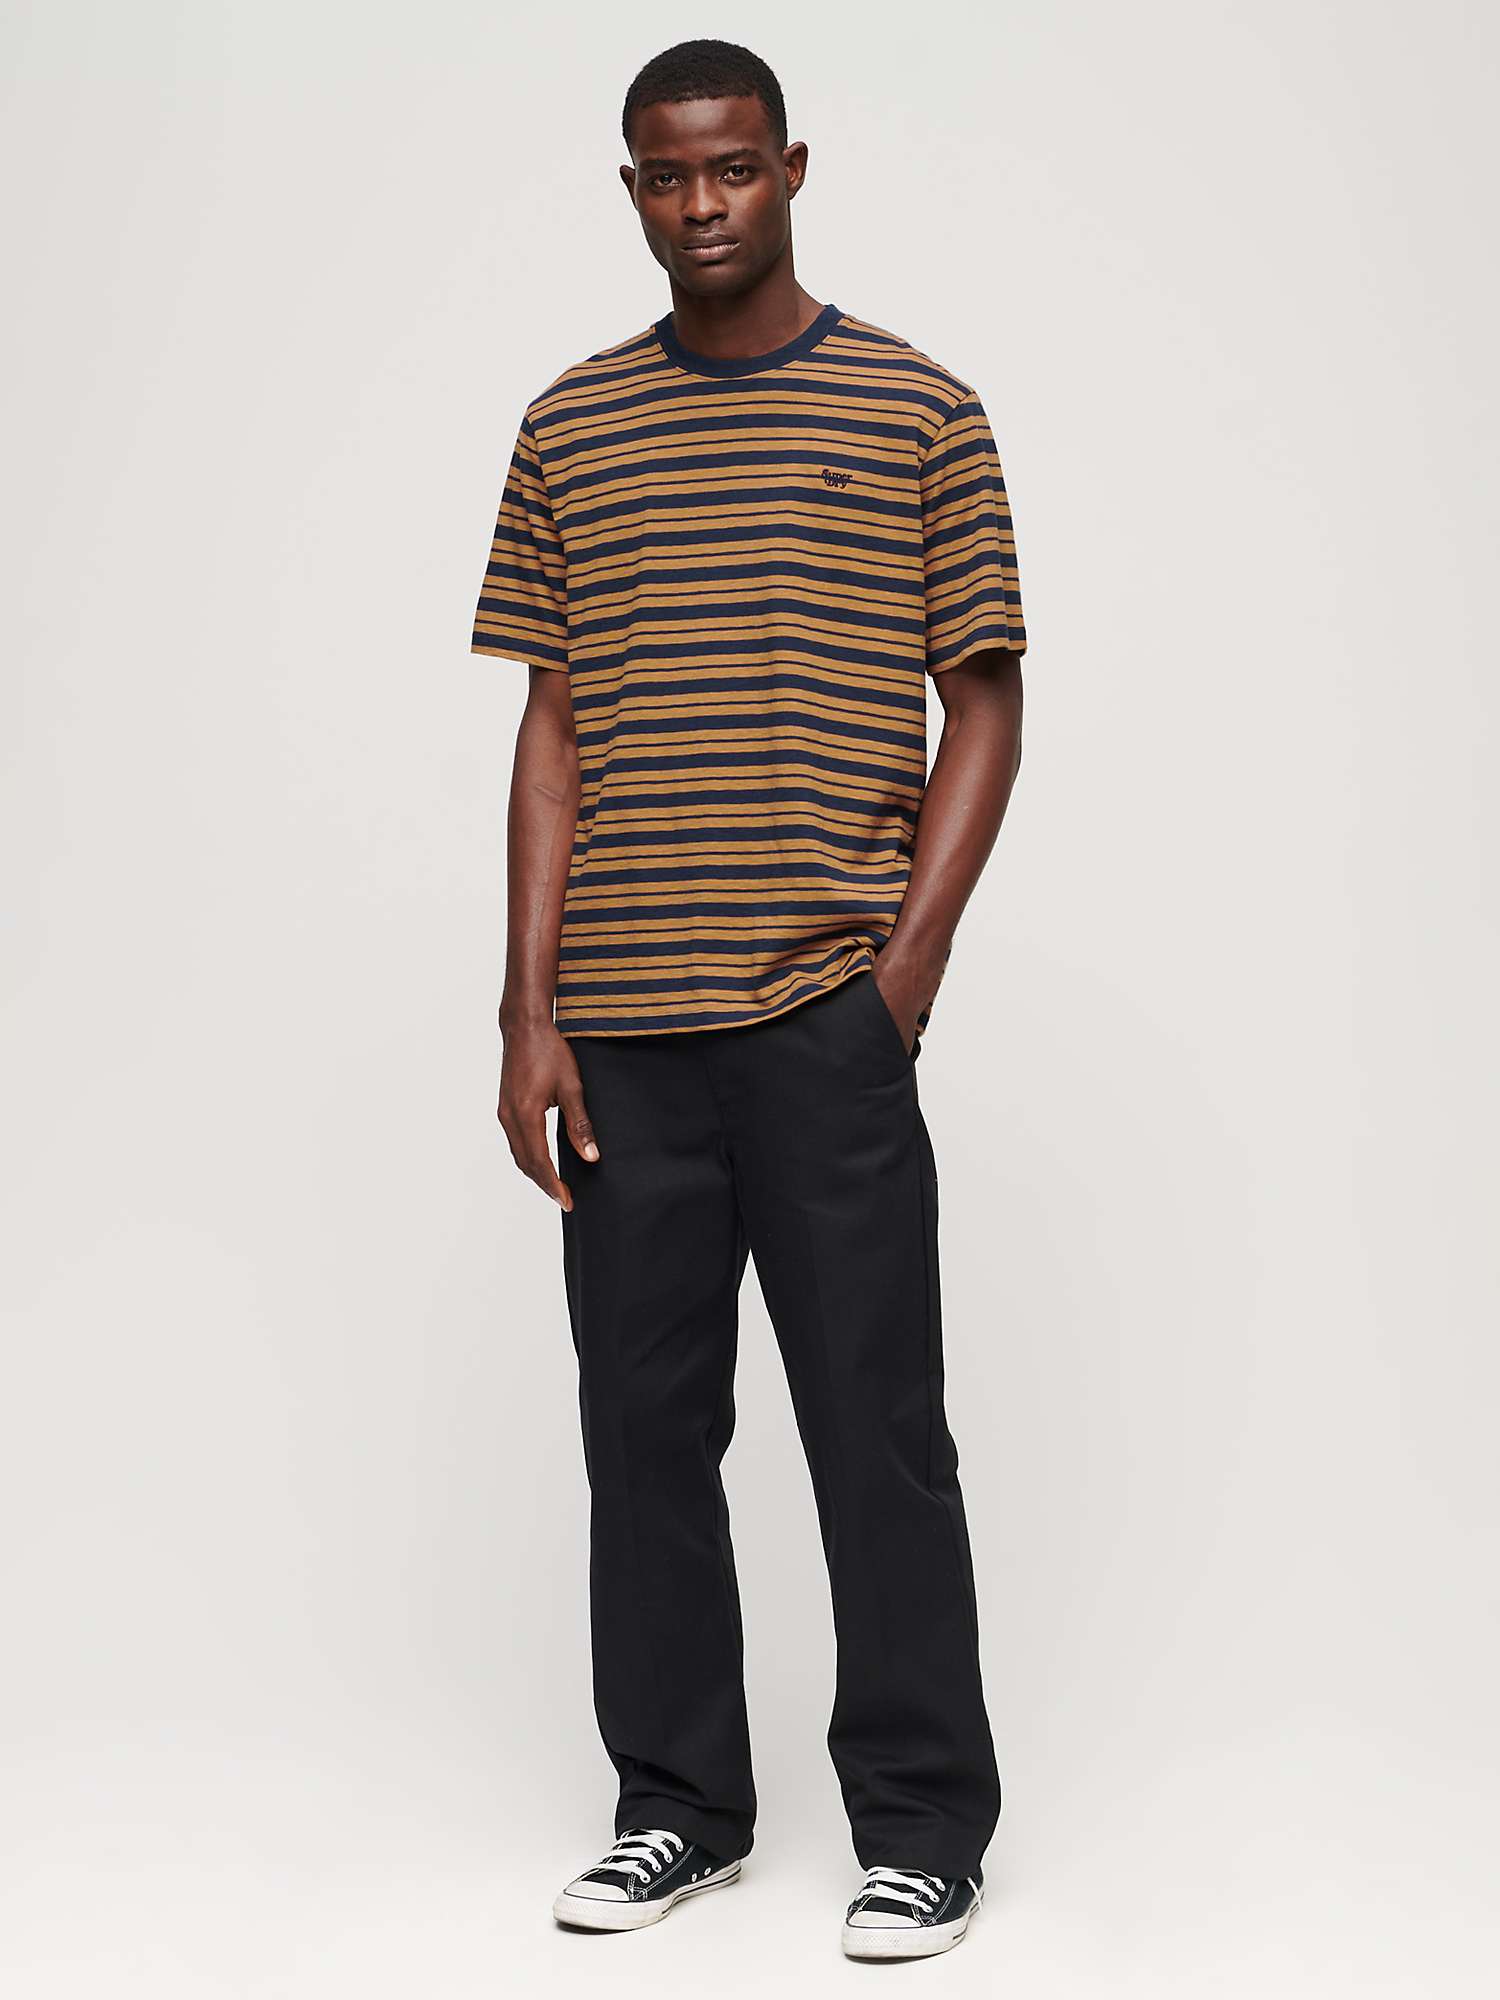 Superdry Relaxed Stripe T-Shirt, Camel Stripe at John Lewis & Partners